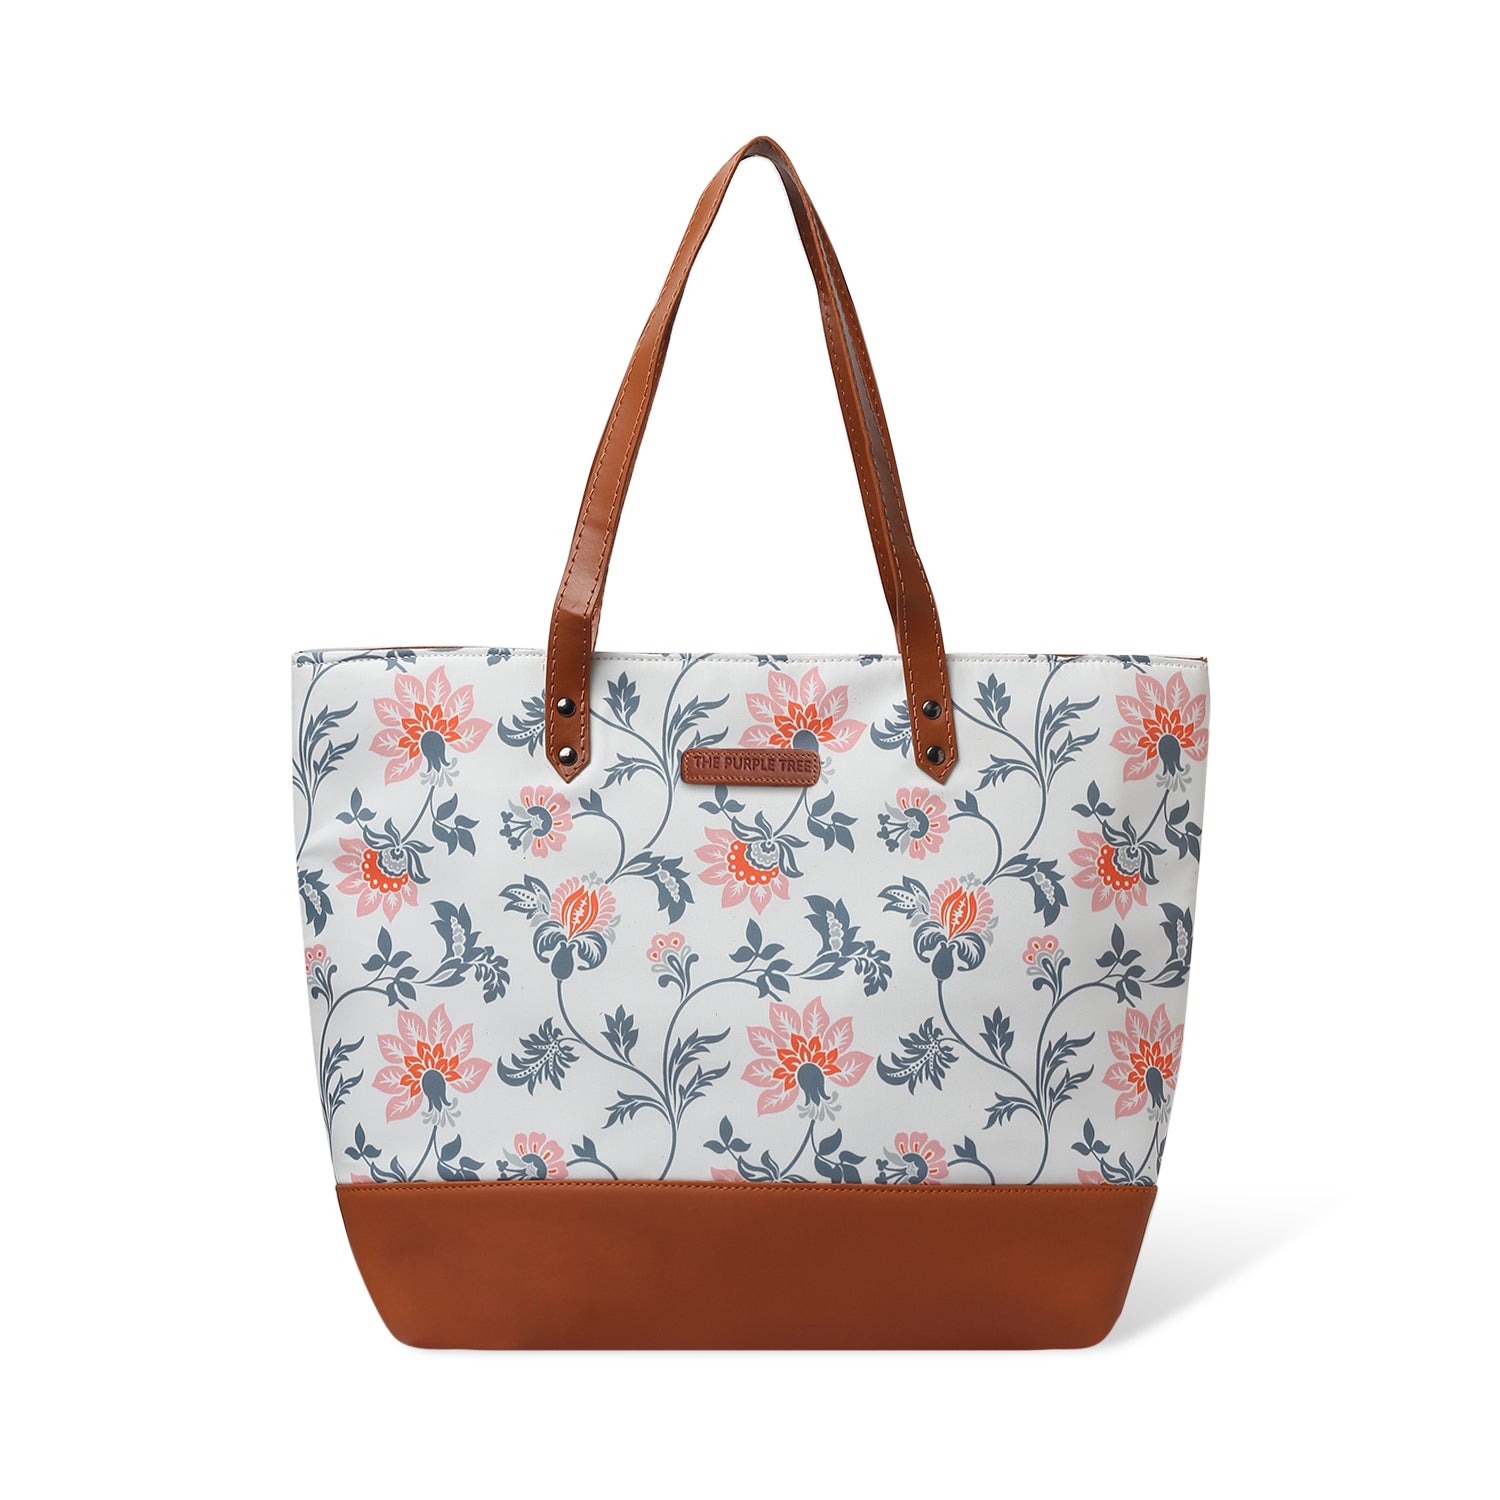 1. A colorful floral tote bag resting on a chair.